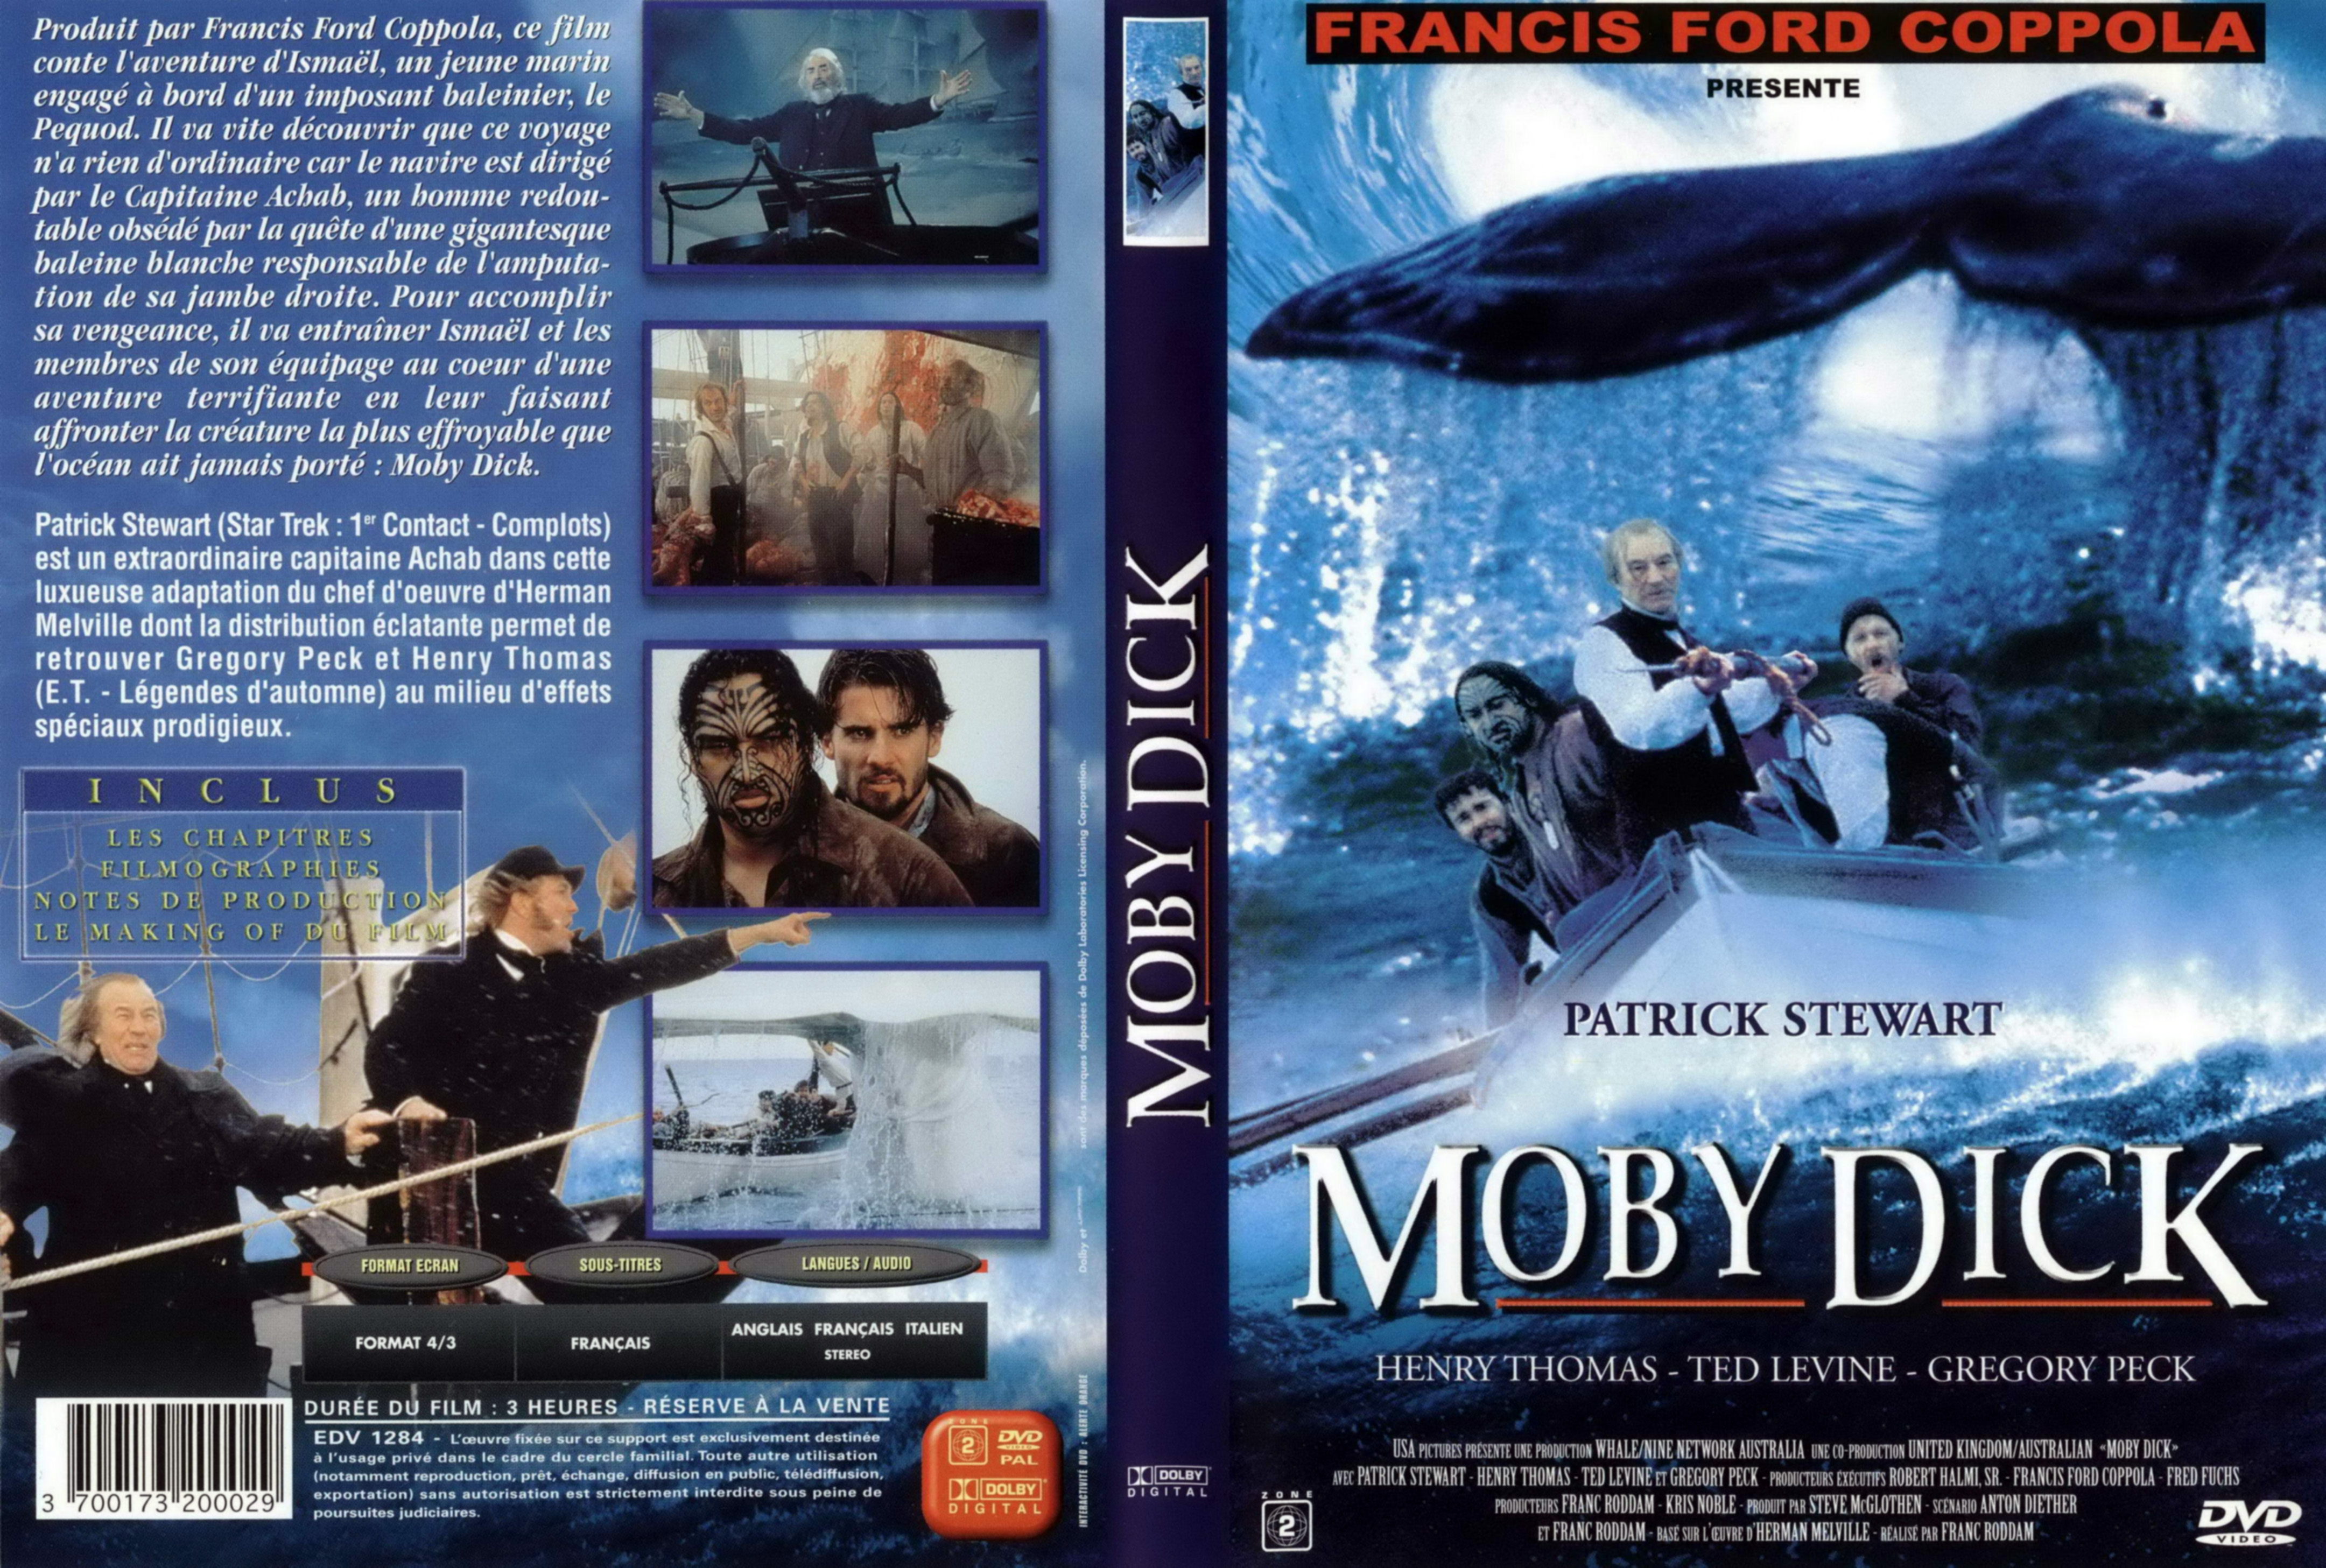 Jaquette DVD Moby dick (1998) v2